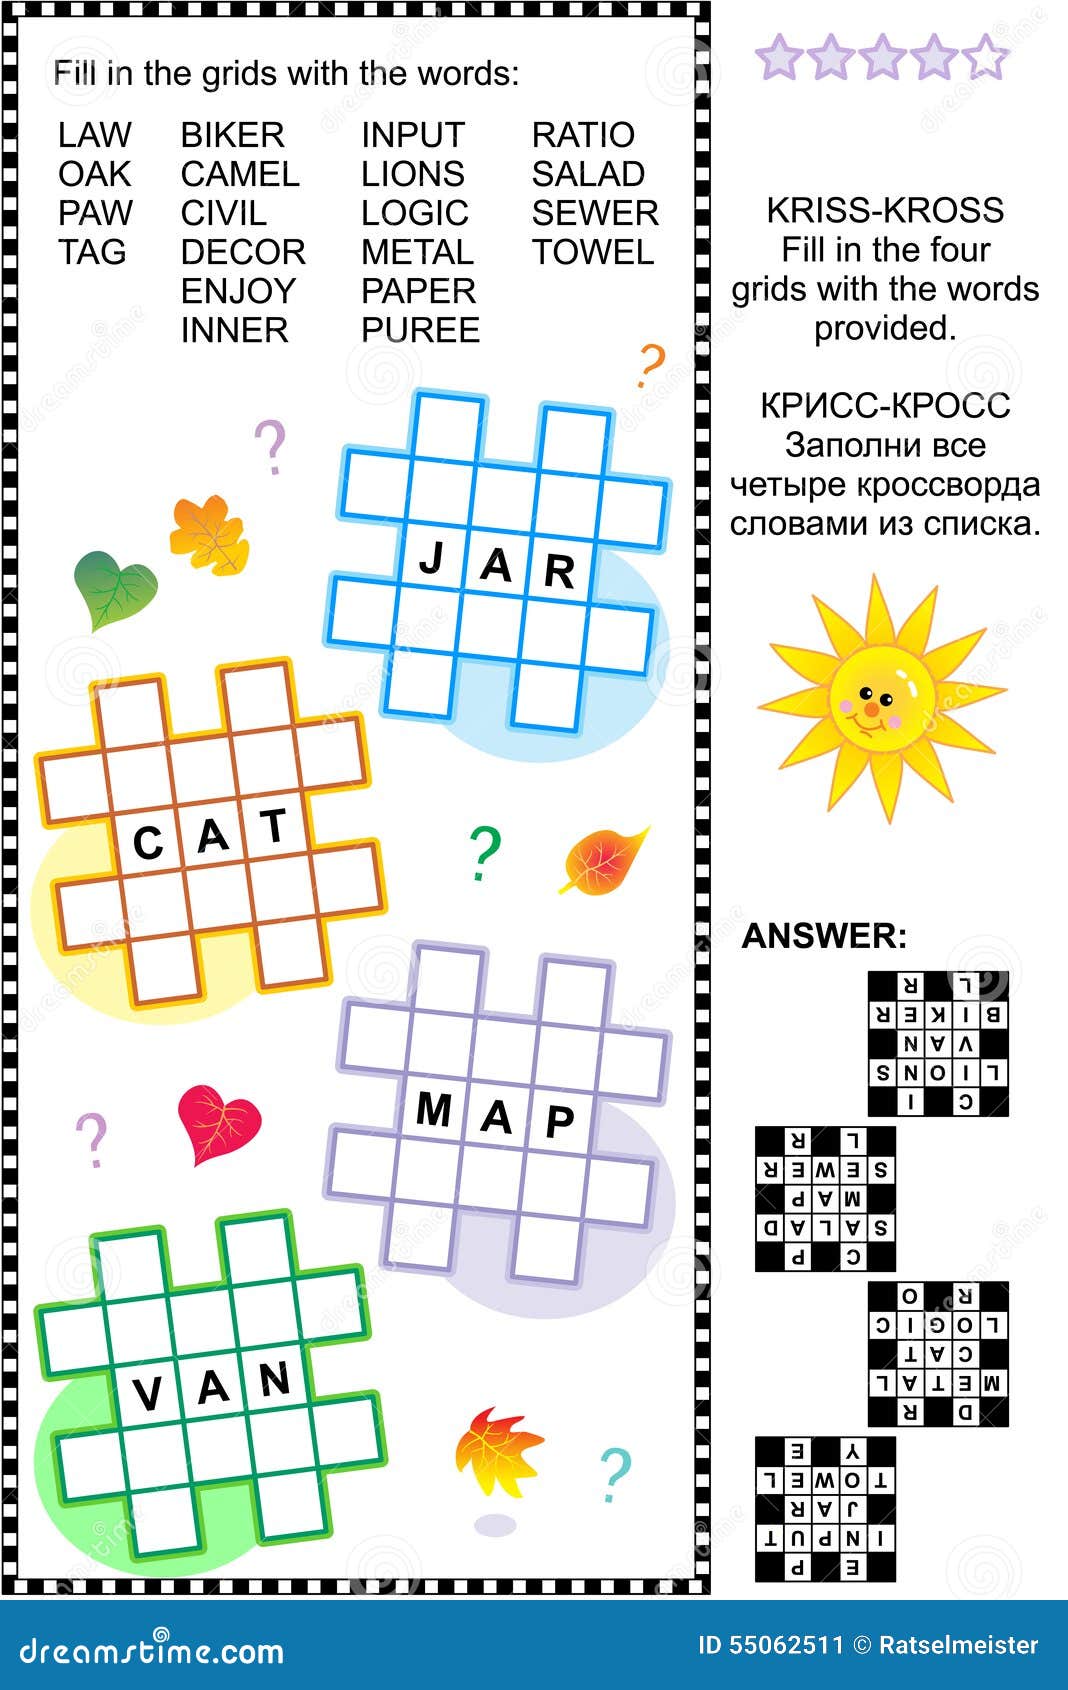 criss-cross (kriss-kross, or fill-in) word puzzle